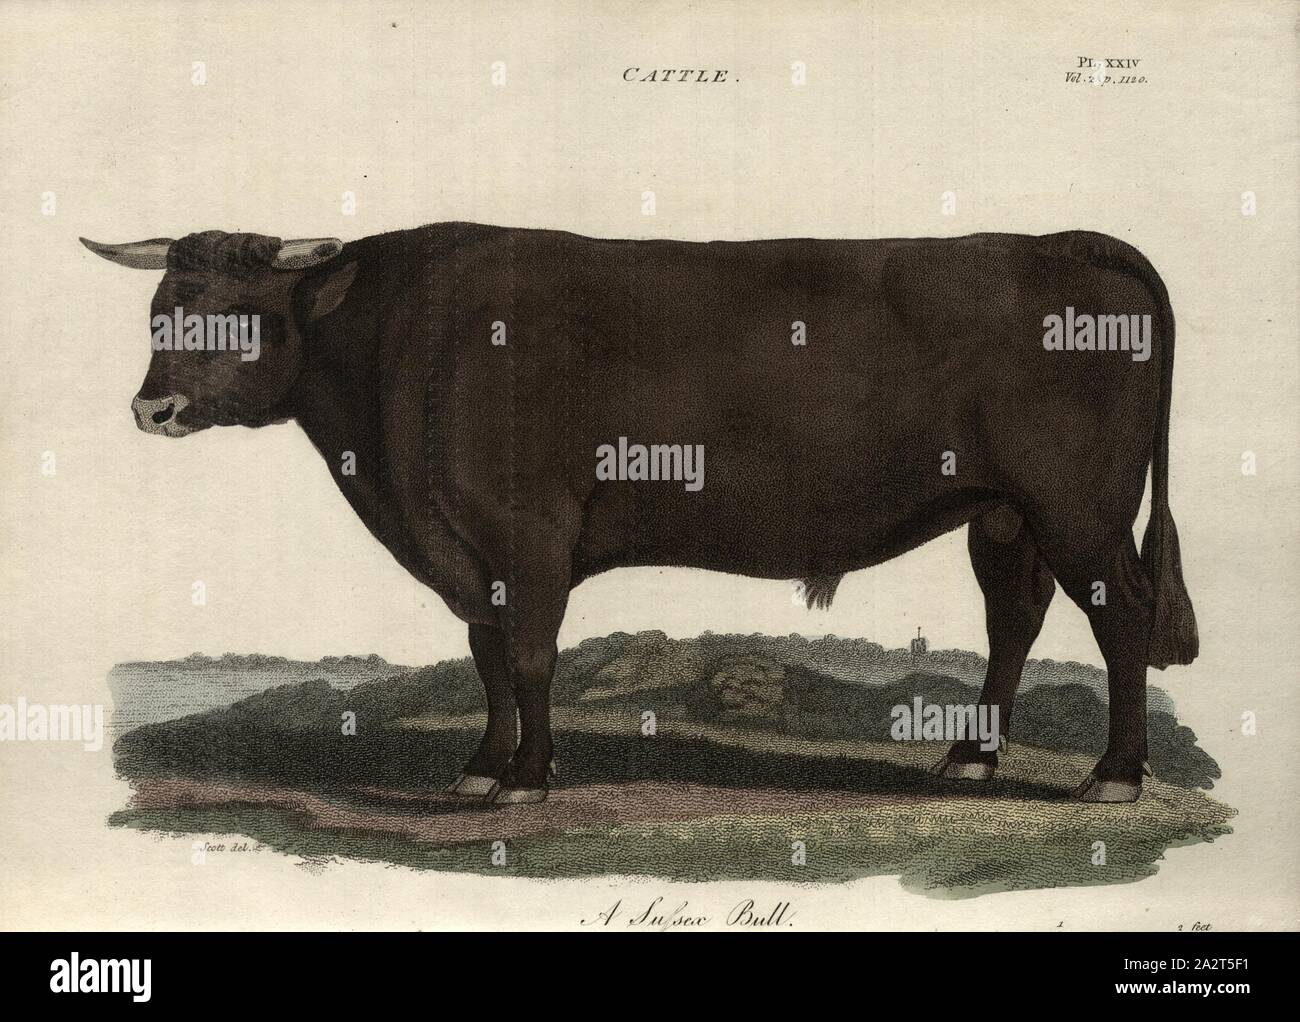 Cattle: A Sussex Bull, Sussex cattle, bull, signed: Scott del, Fig. 24, Pl. XXIV, after p. 1120, Scott (del.), R.W. Dickson: Practical agriculture, or, a complete system of modern husbandry: with the methods of planting, and the management of live stock. Bd. 2. London: printed for Richard Phillips; by R. Taylor and Co., 1805 Stock Photo